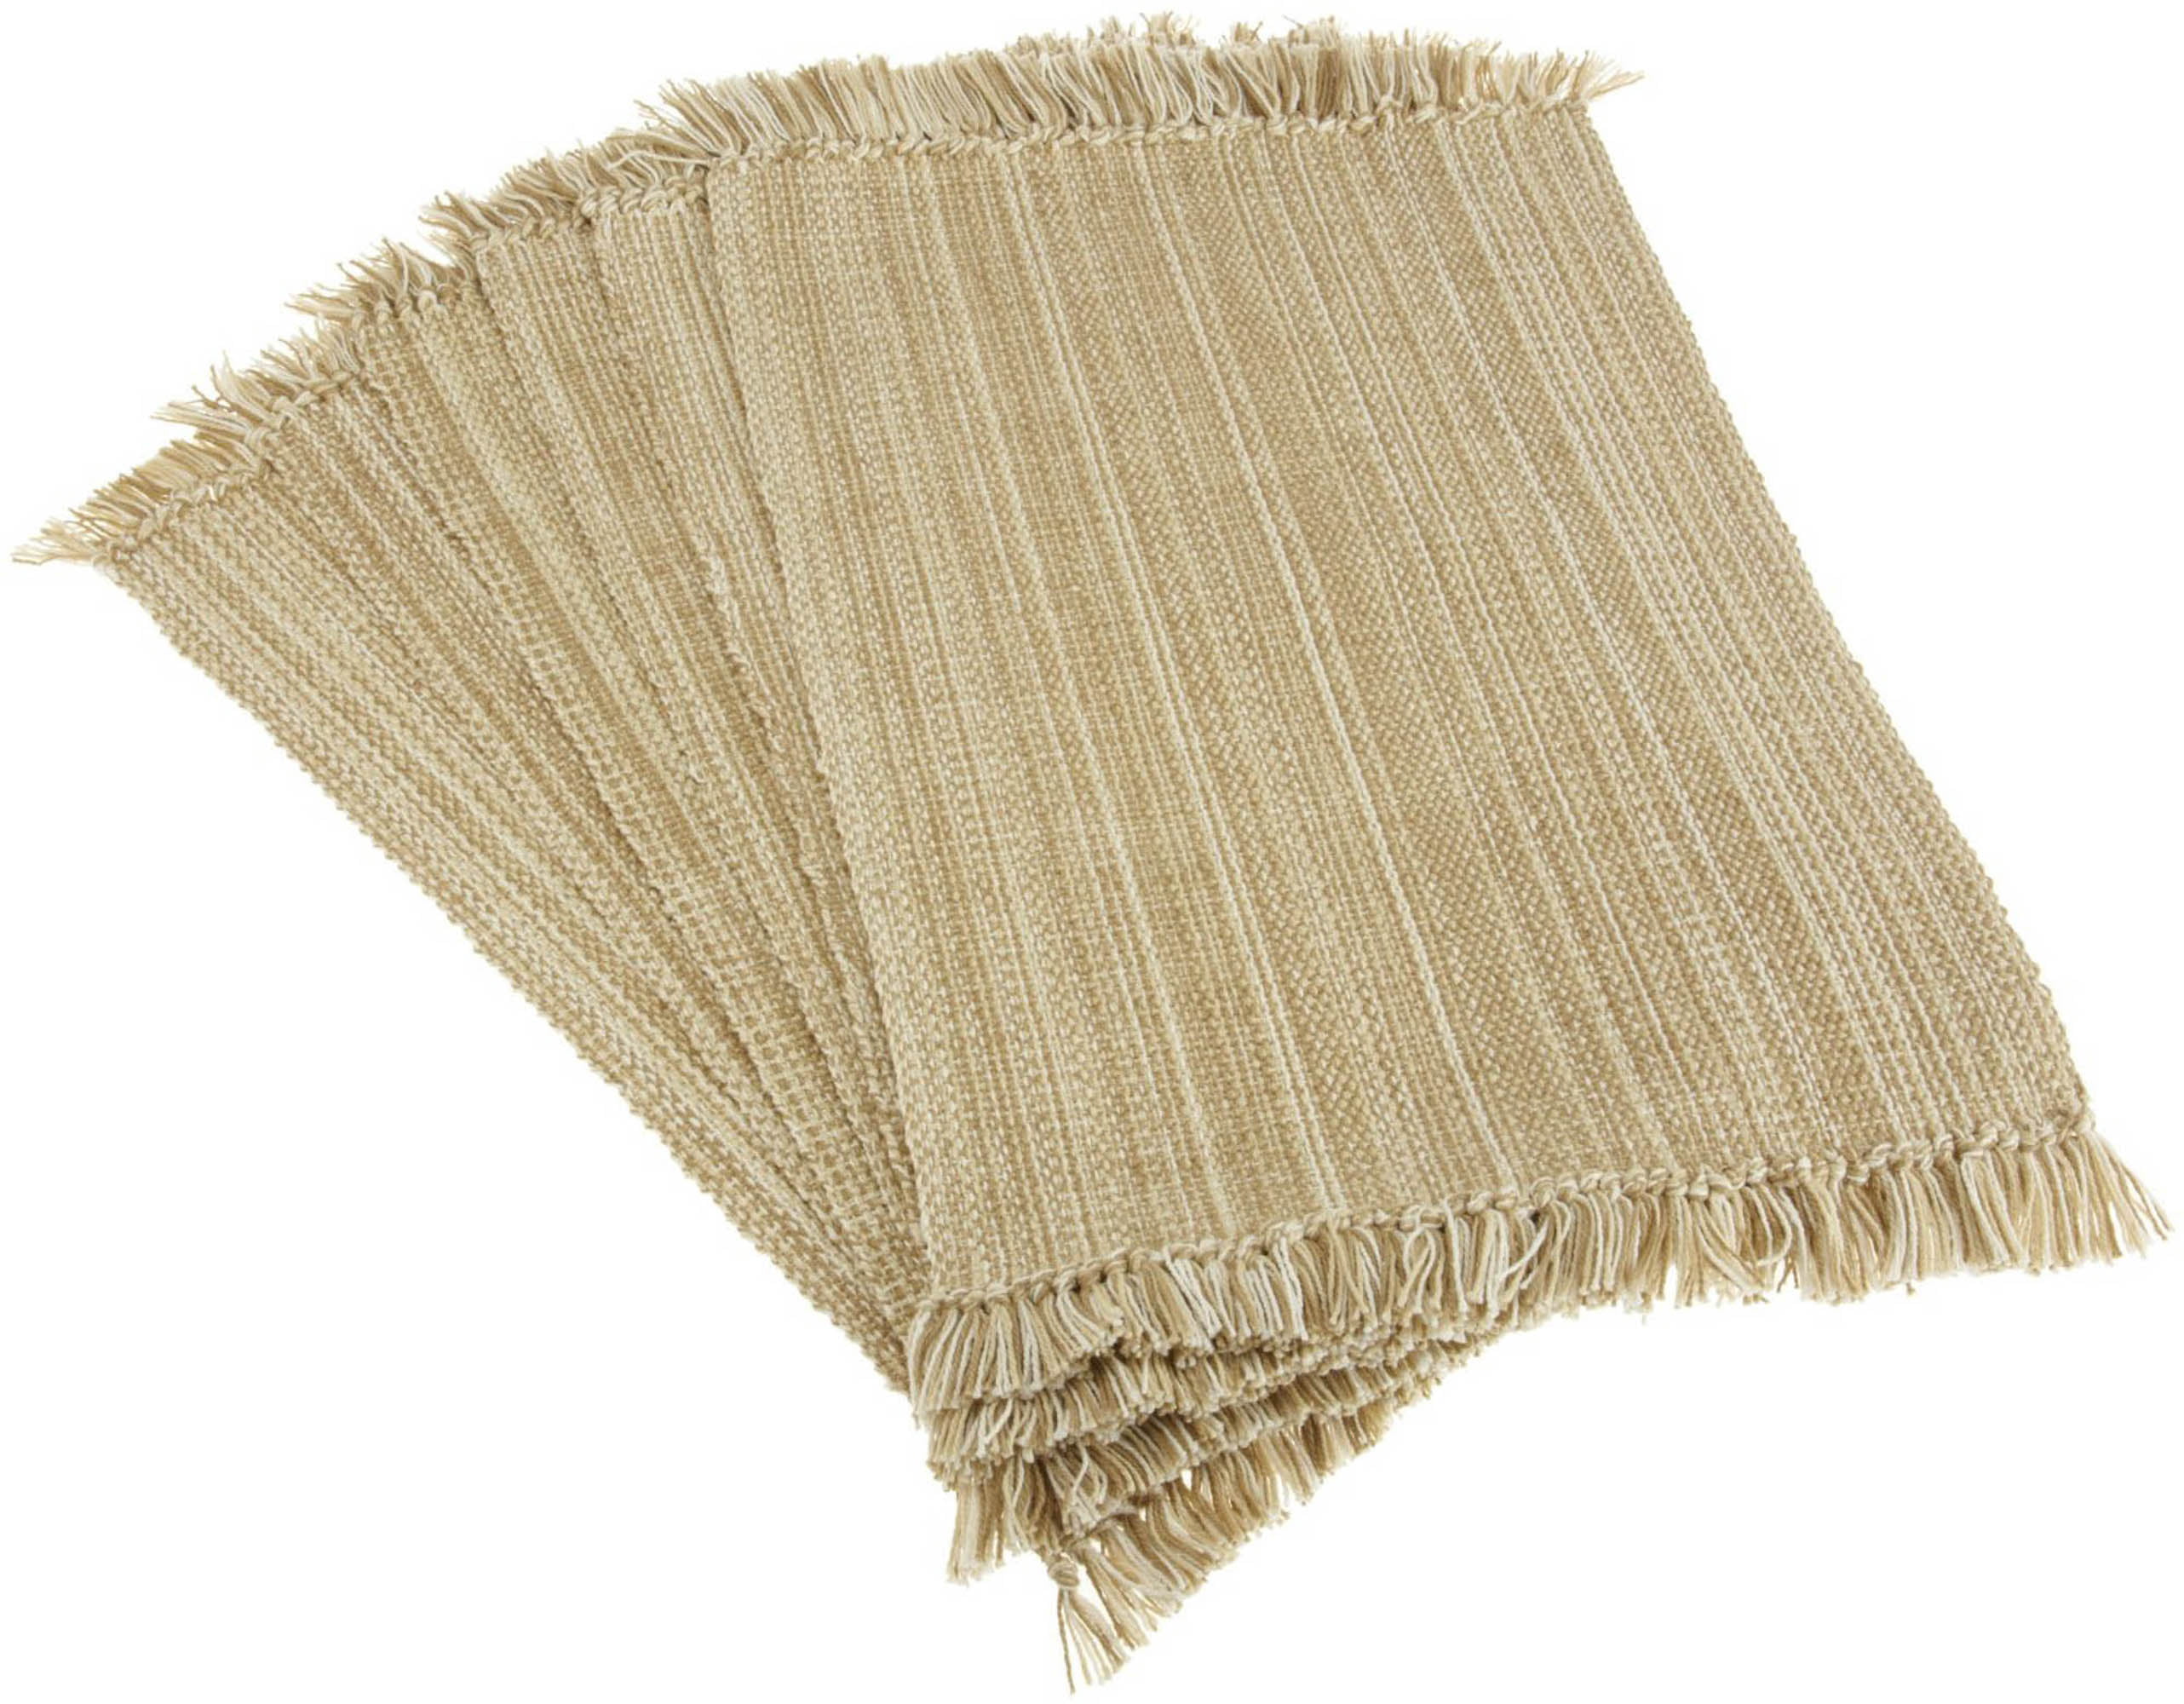 Hand Woven by Skilled artisans 4 Pack Salsa Stripe Hand Knotted Fringe Placemats Natural Light Olive 100% Cotton Unique Hand Knotted Decorative Fringe 13x19 Cotton Craft 